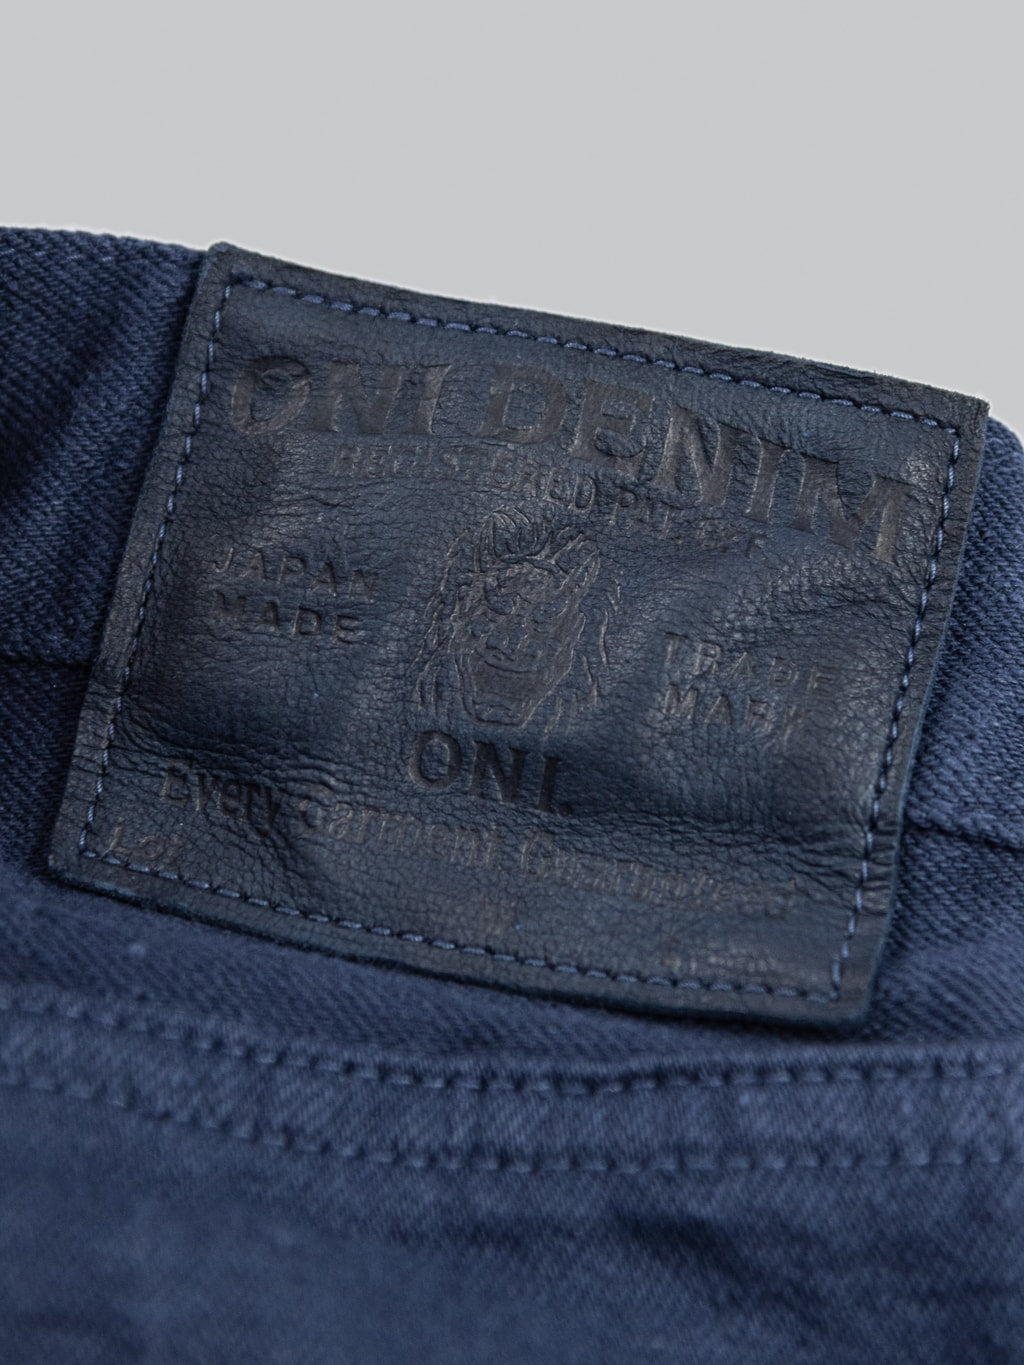 ONI Denim 612 Super Low Tension Navy Relaxed Tapered Jeans leather patch